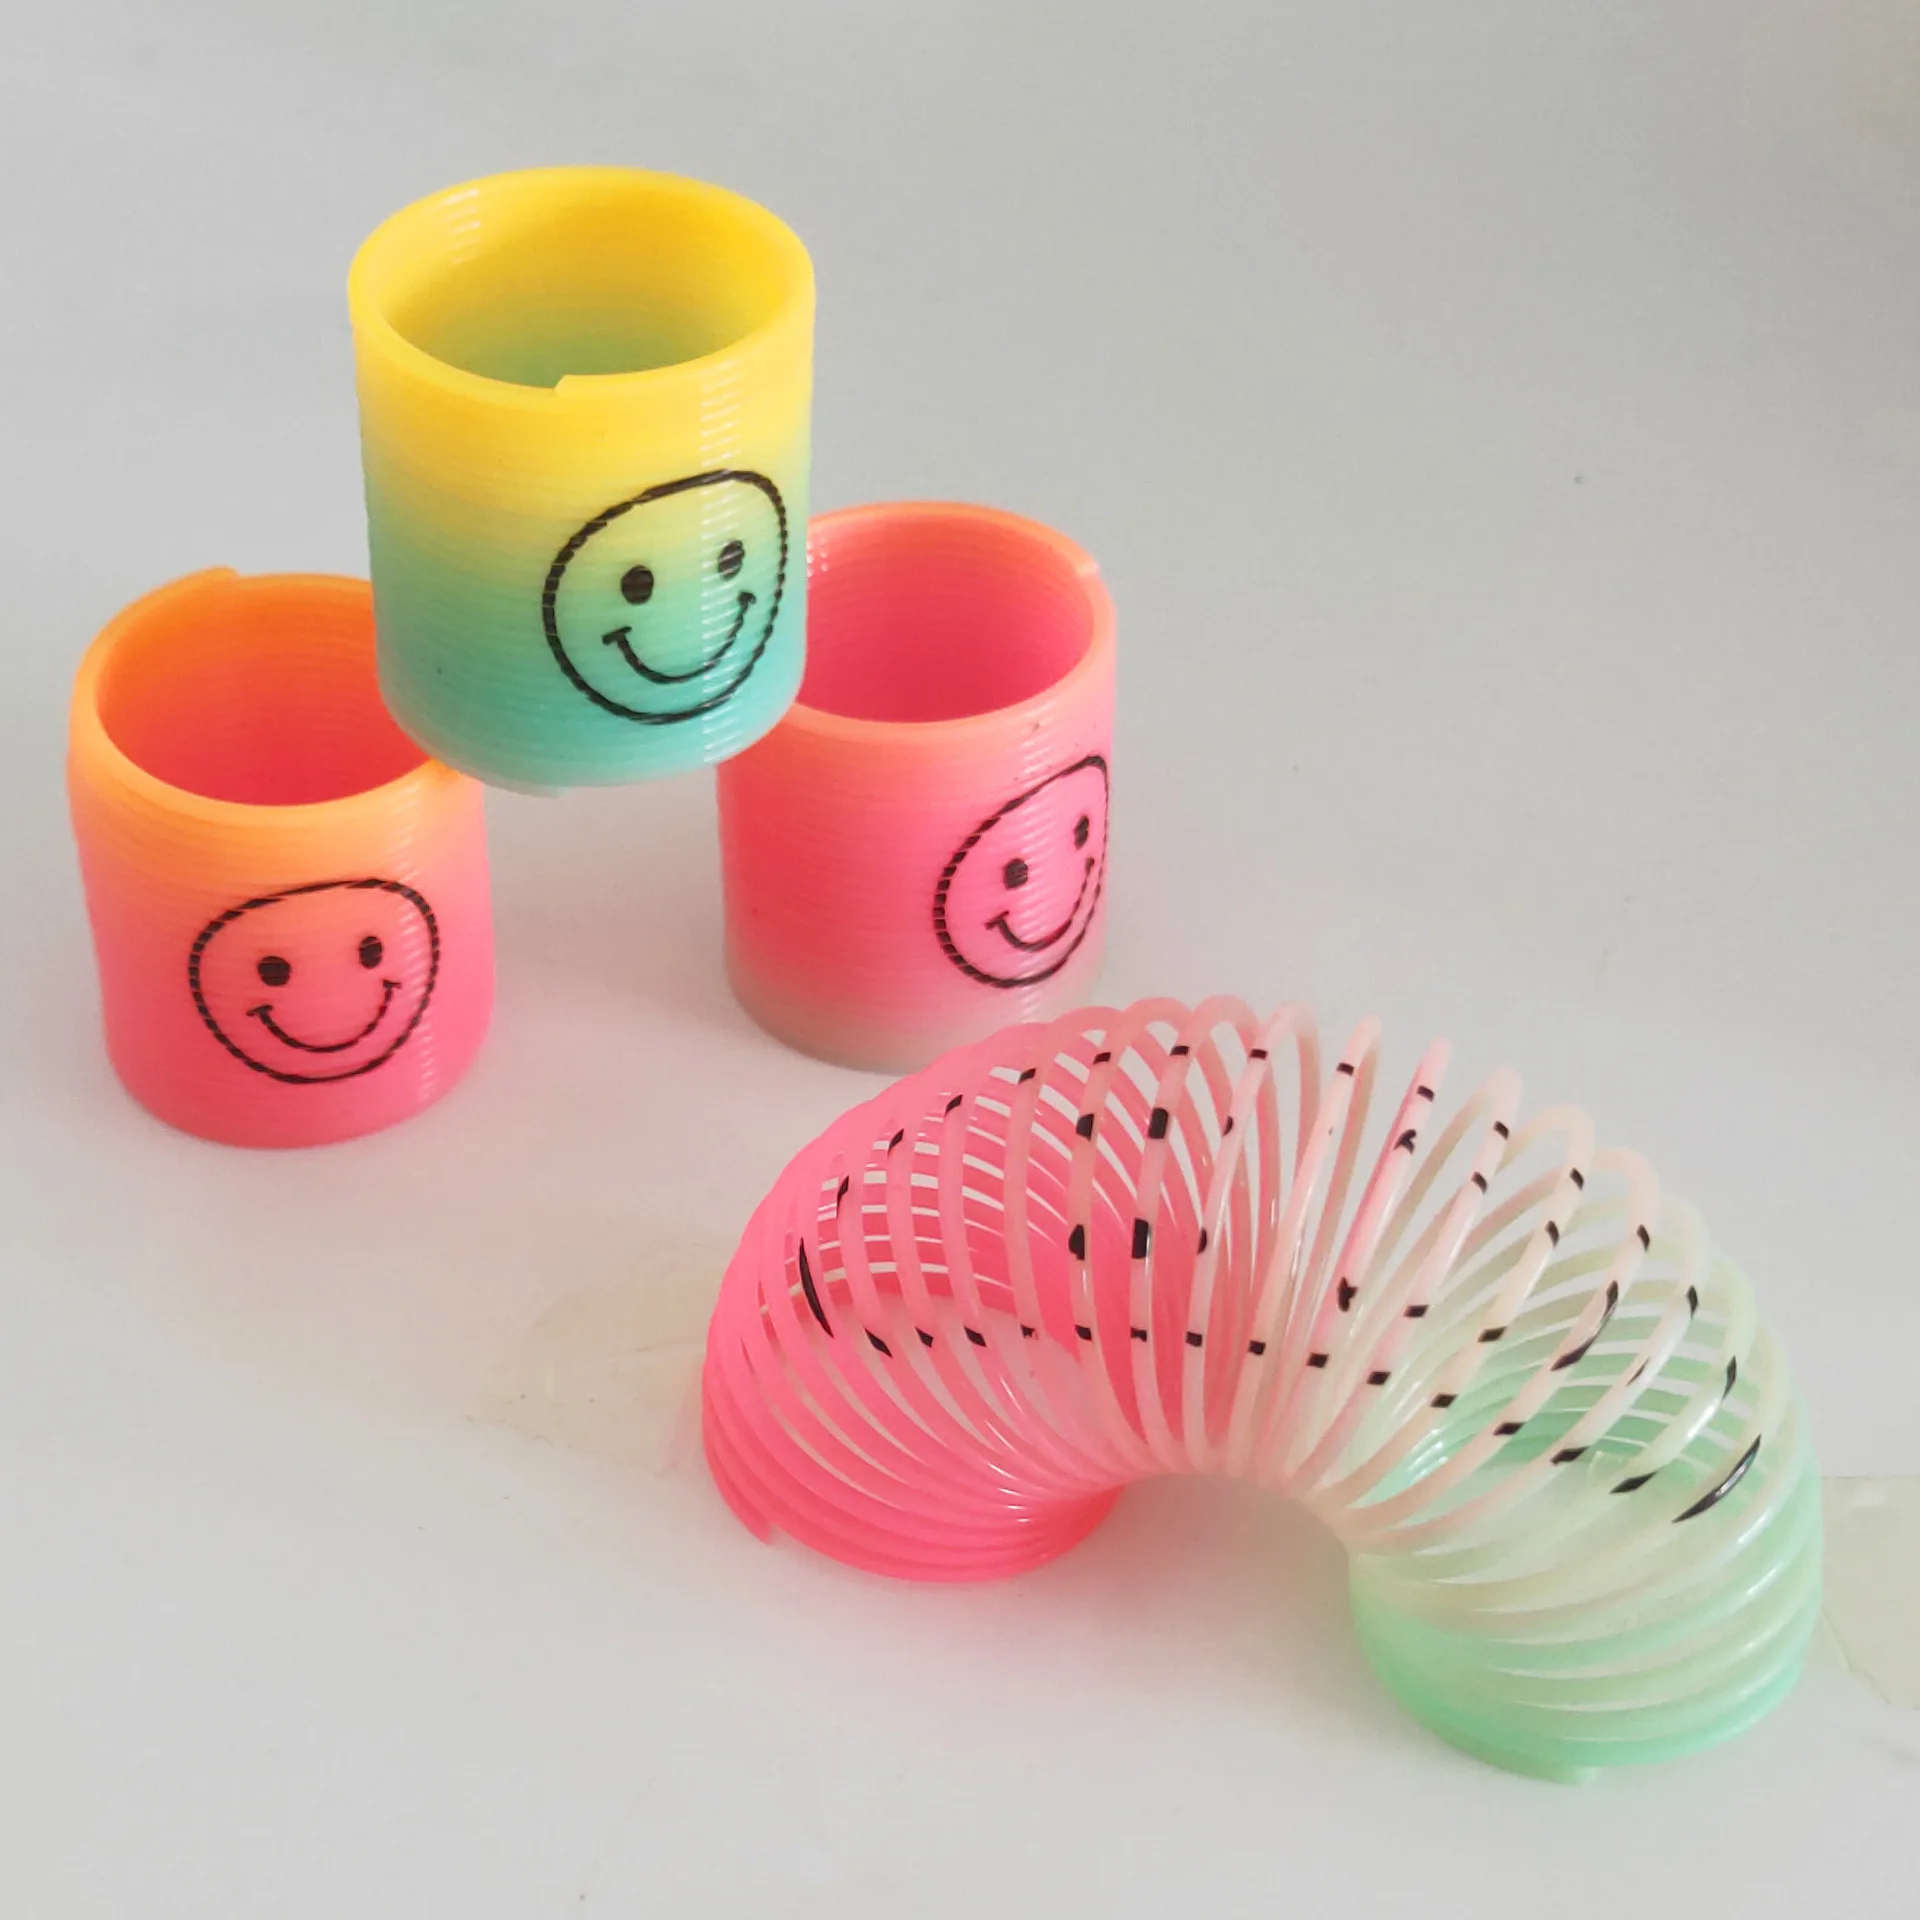 Ground Promotion Small Gift Smiley Spring Rainbow Ring Rainbow Tower Creative Children'S Educational Toy Gift 12 a Bag